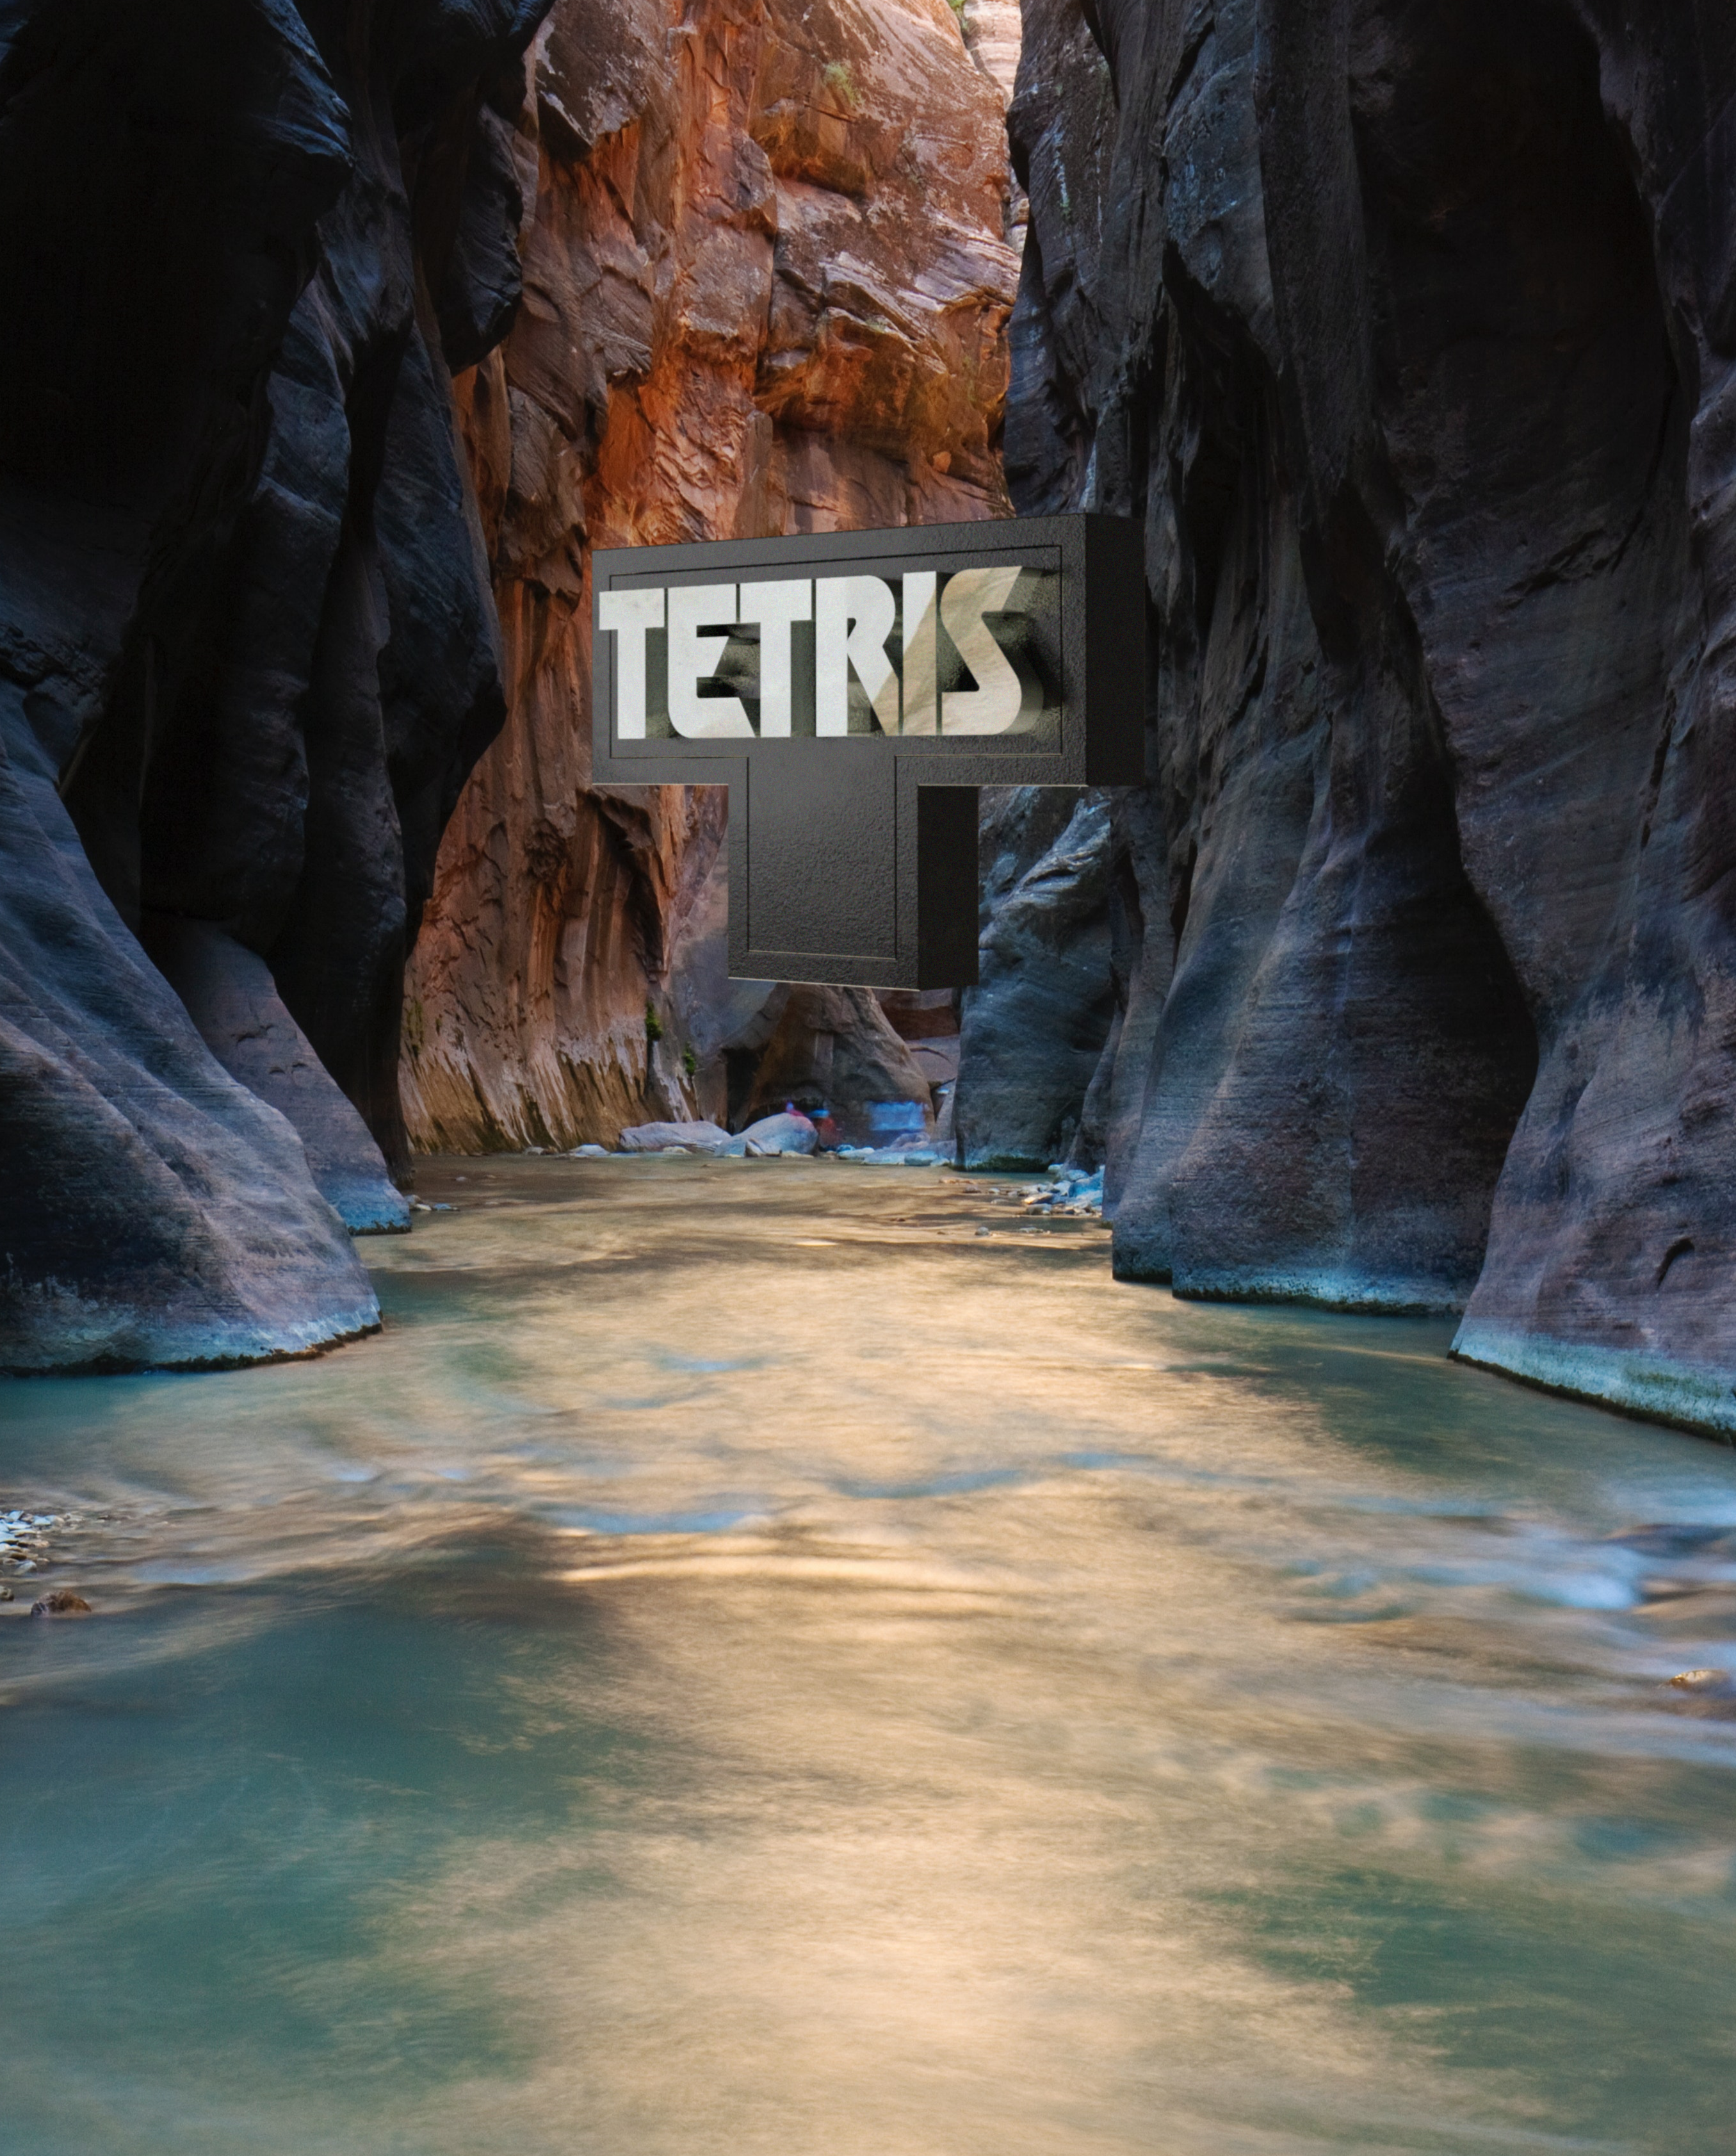 A 3D render of a black monolith Tetris logo floating above water in a cavern.